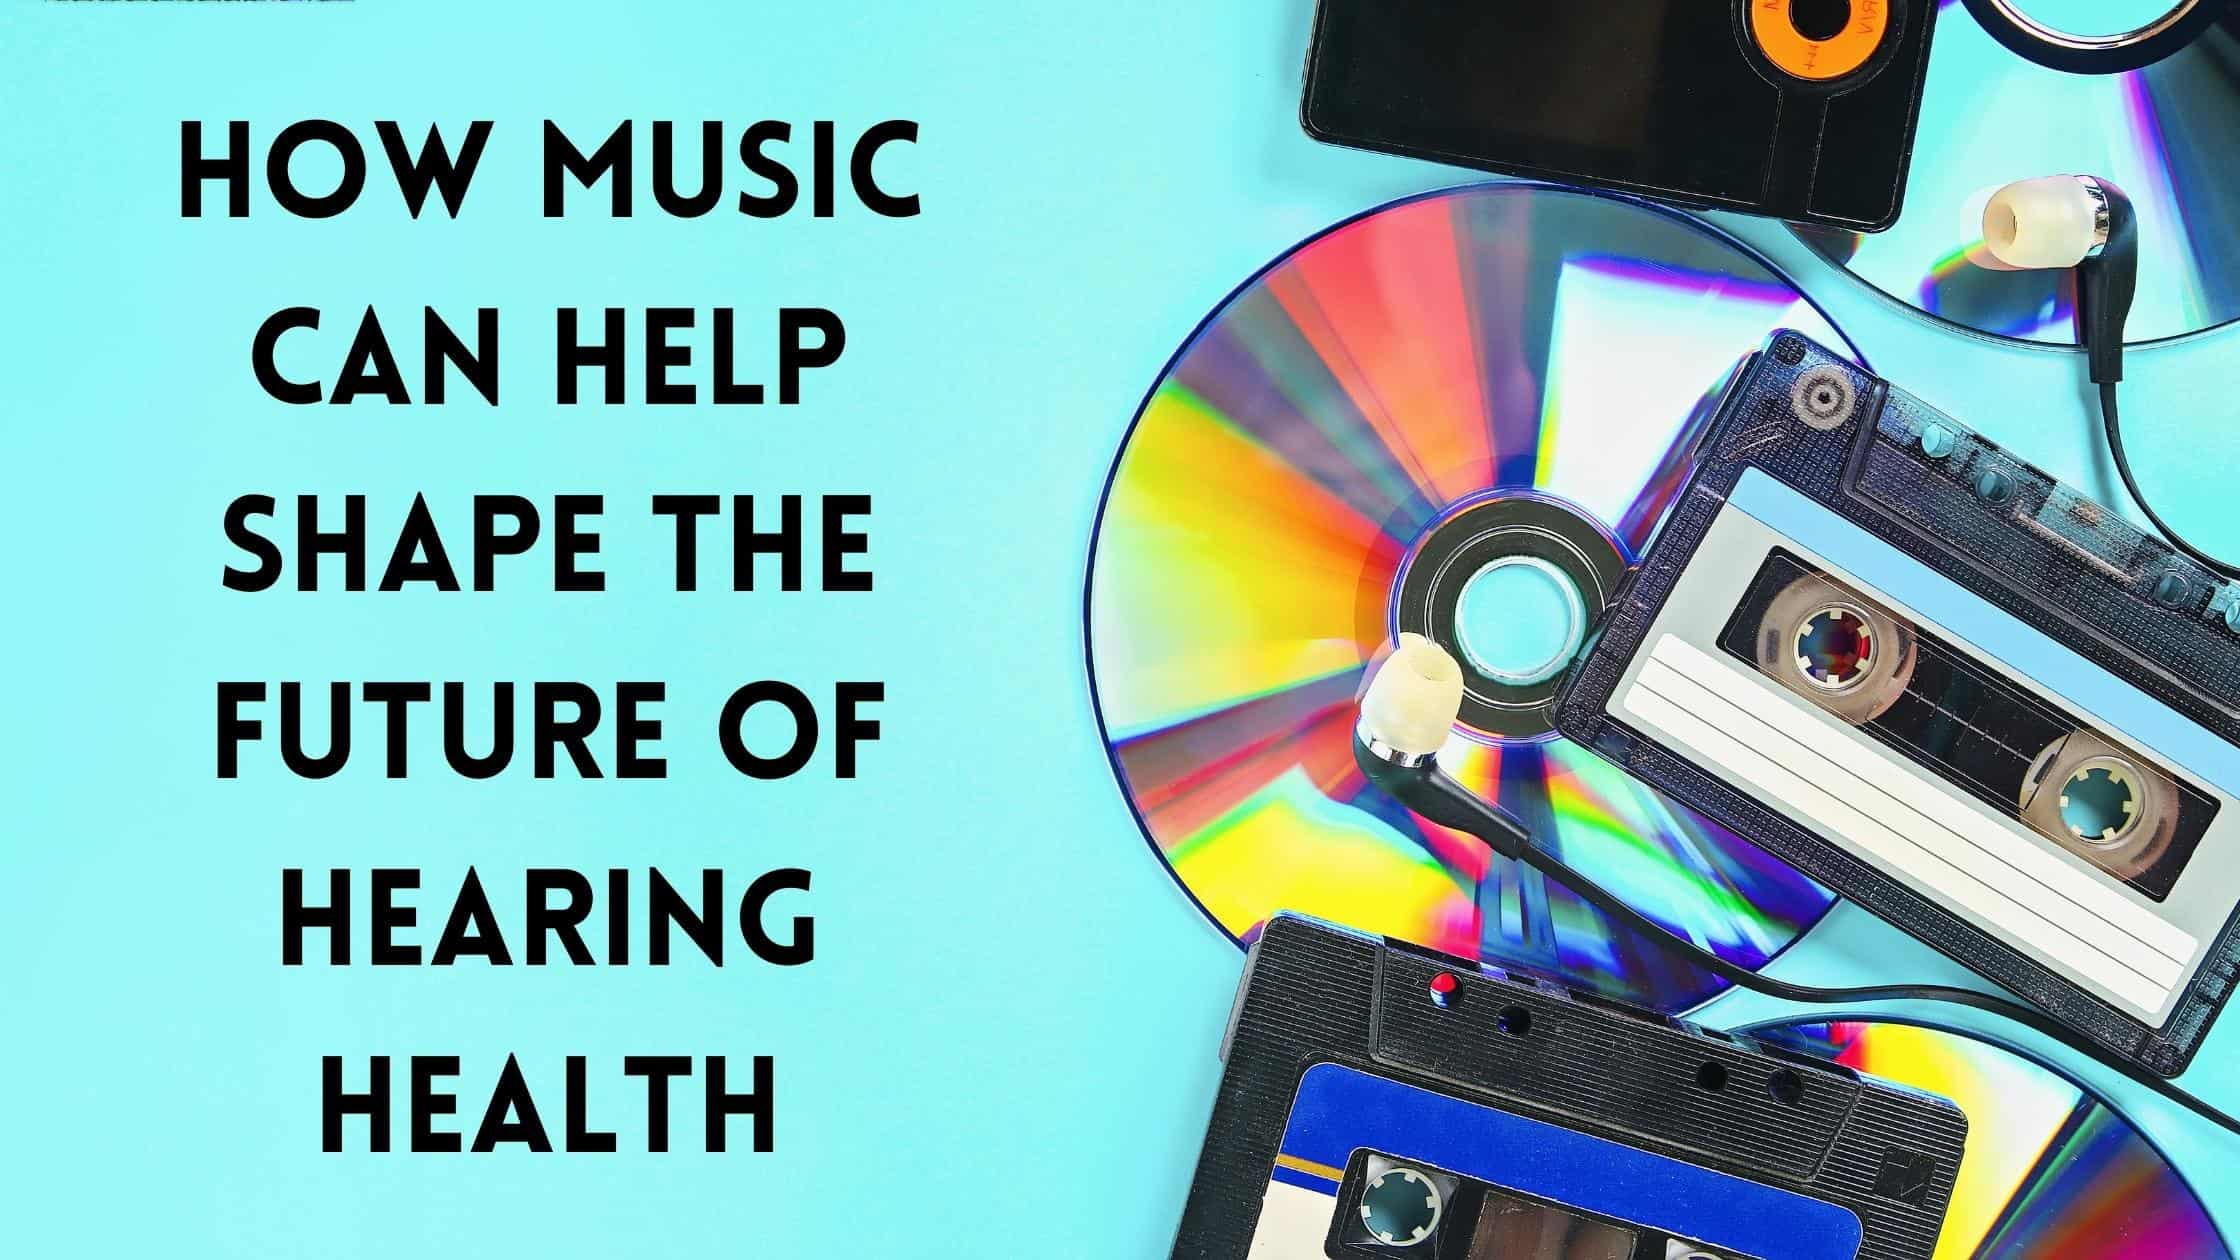 How Music Can Help Shape the Future of Hearing Health